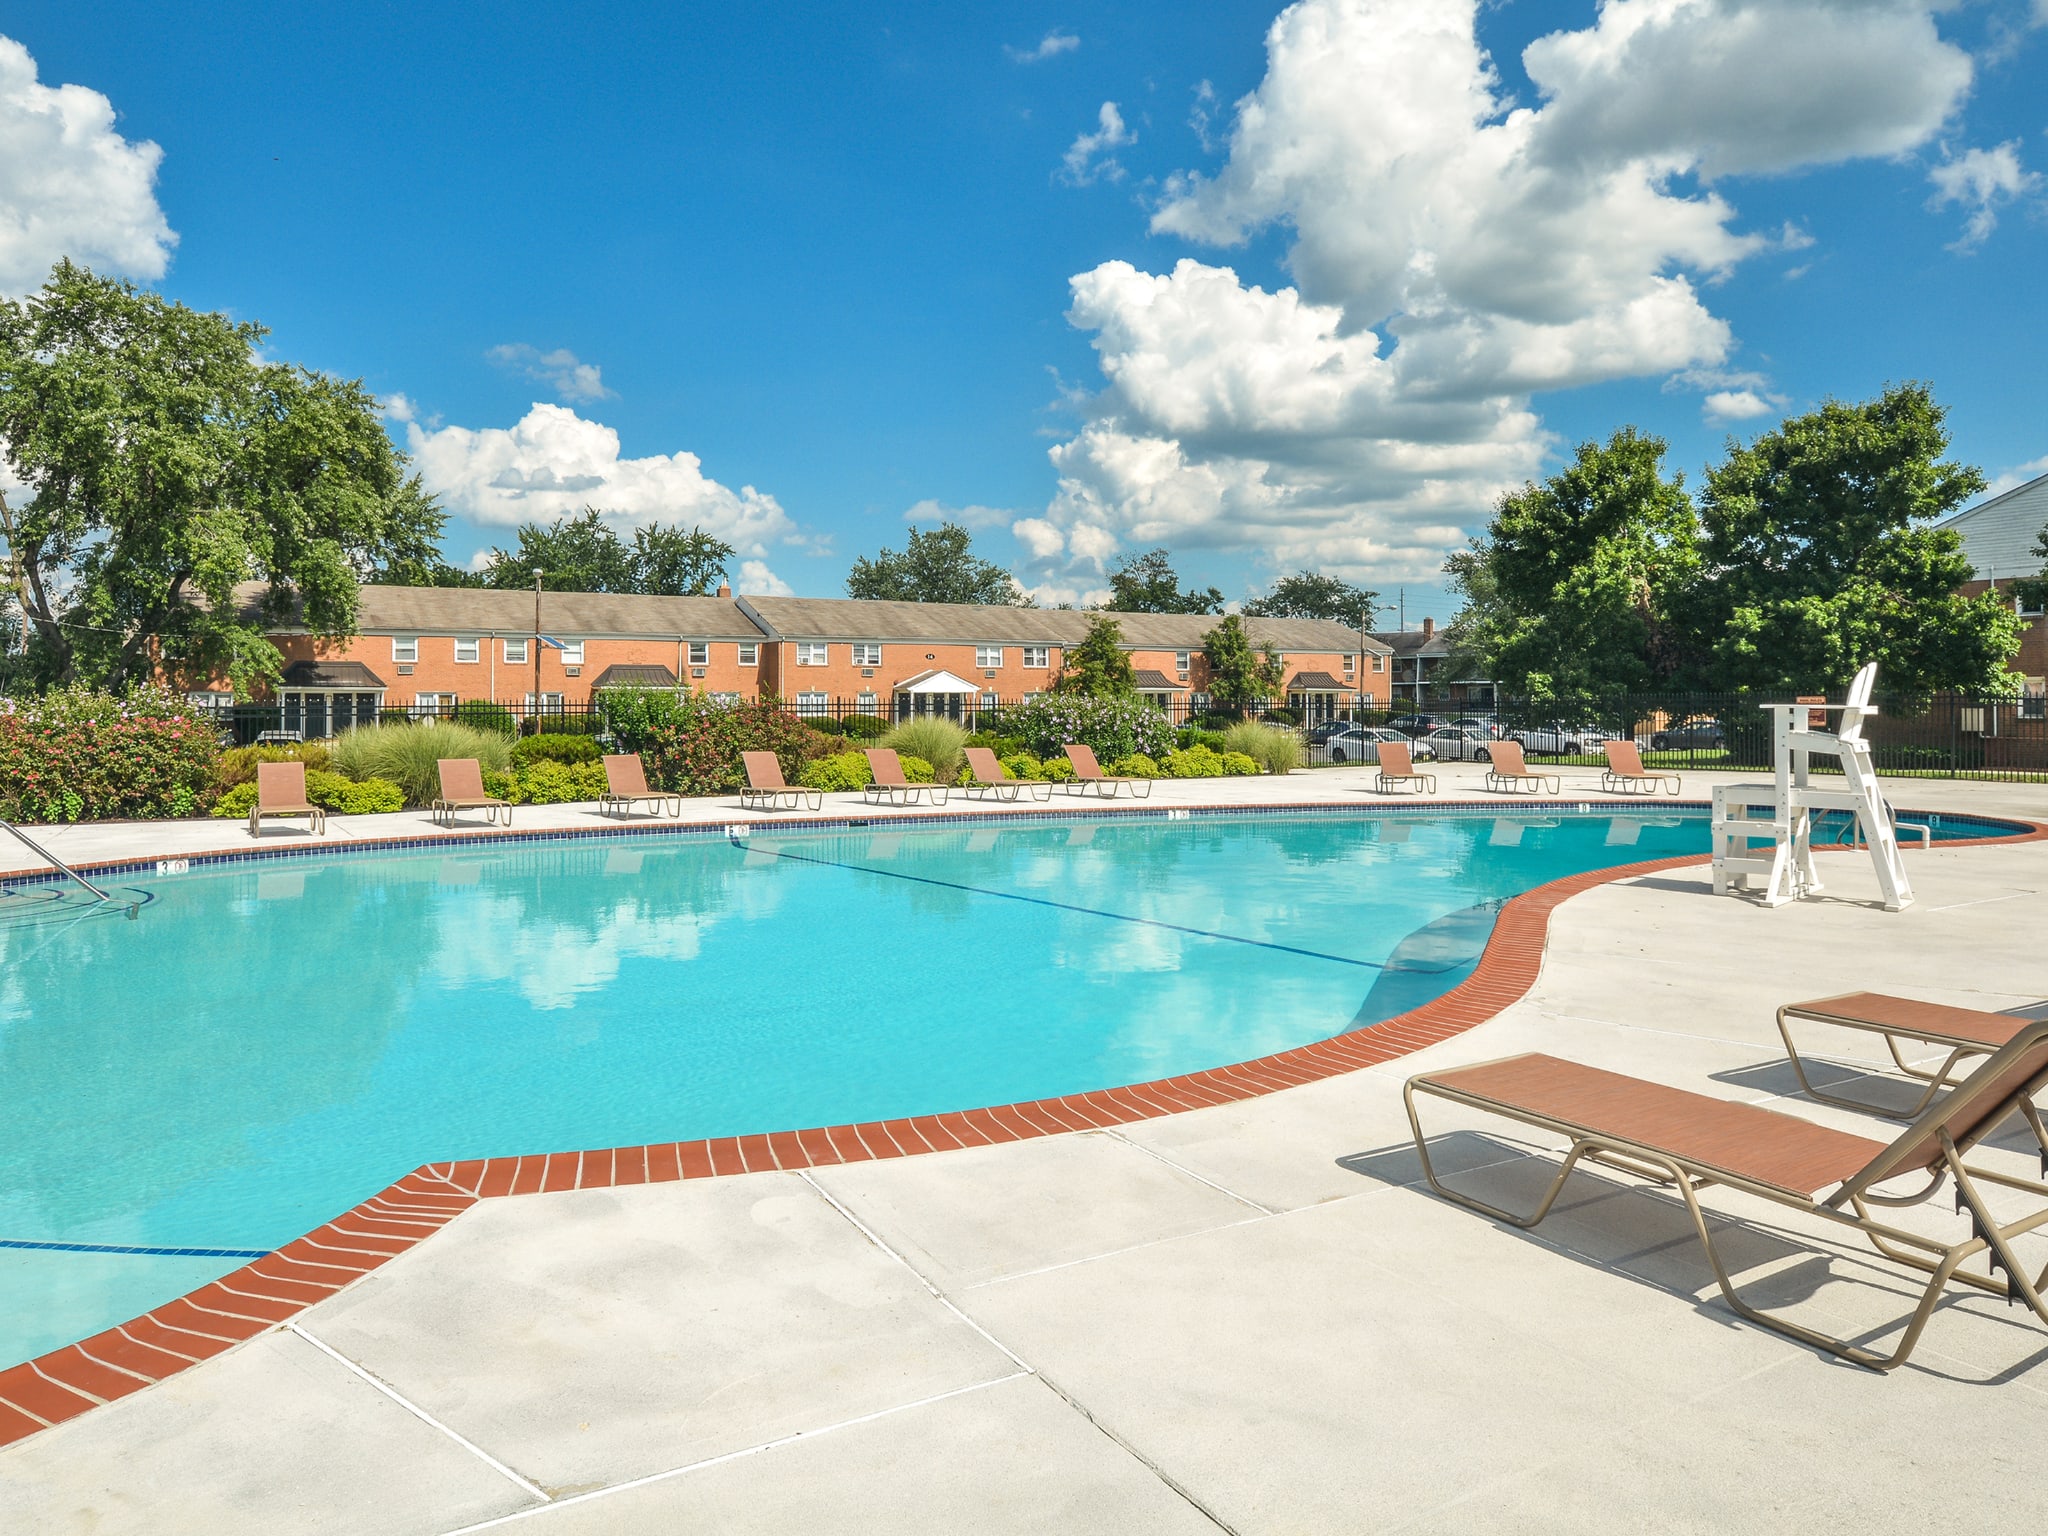 On-site pool at Orchard Park in Edgewater Park, New Jersey